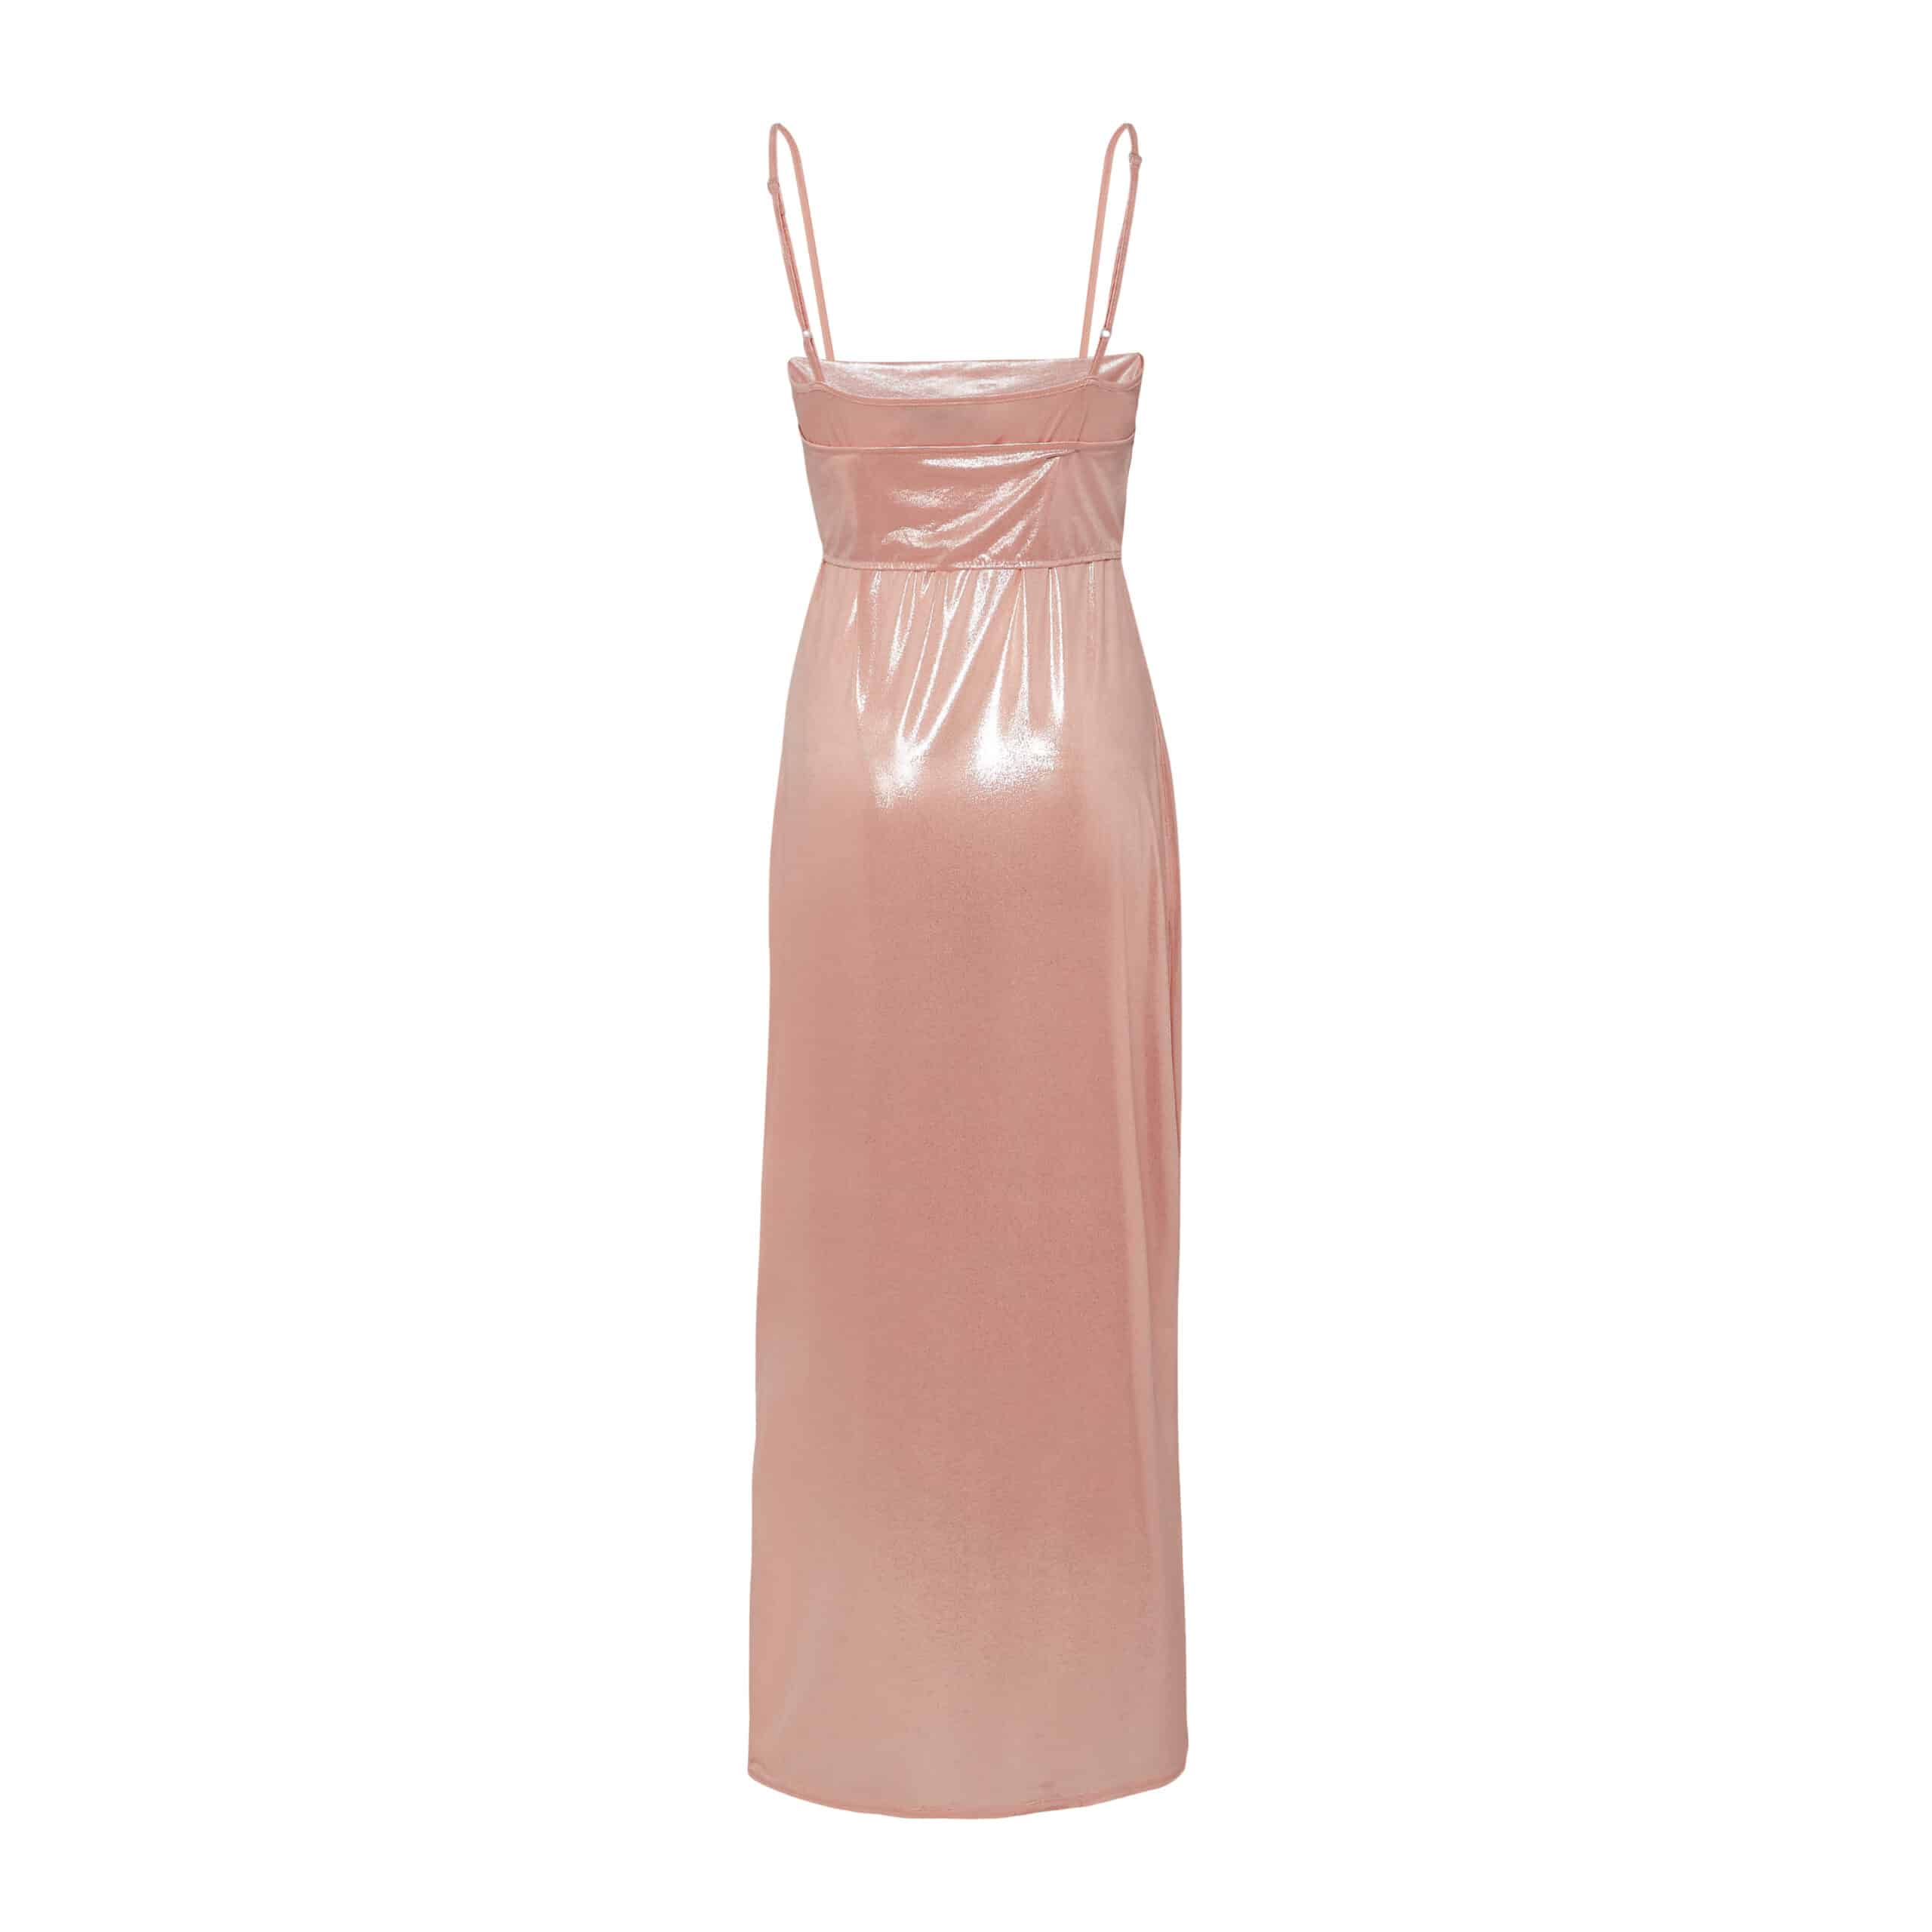 Know Me Rose Gold Corset Dress - APPAPOP